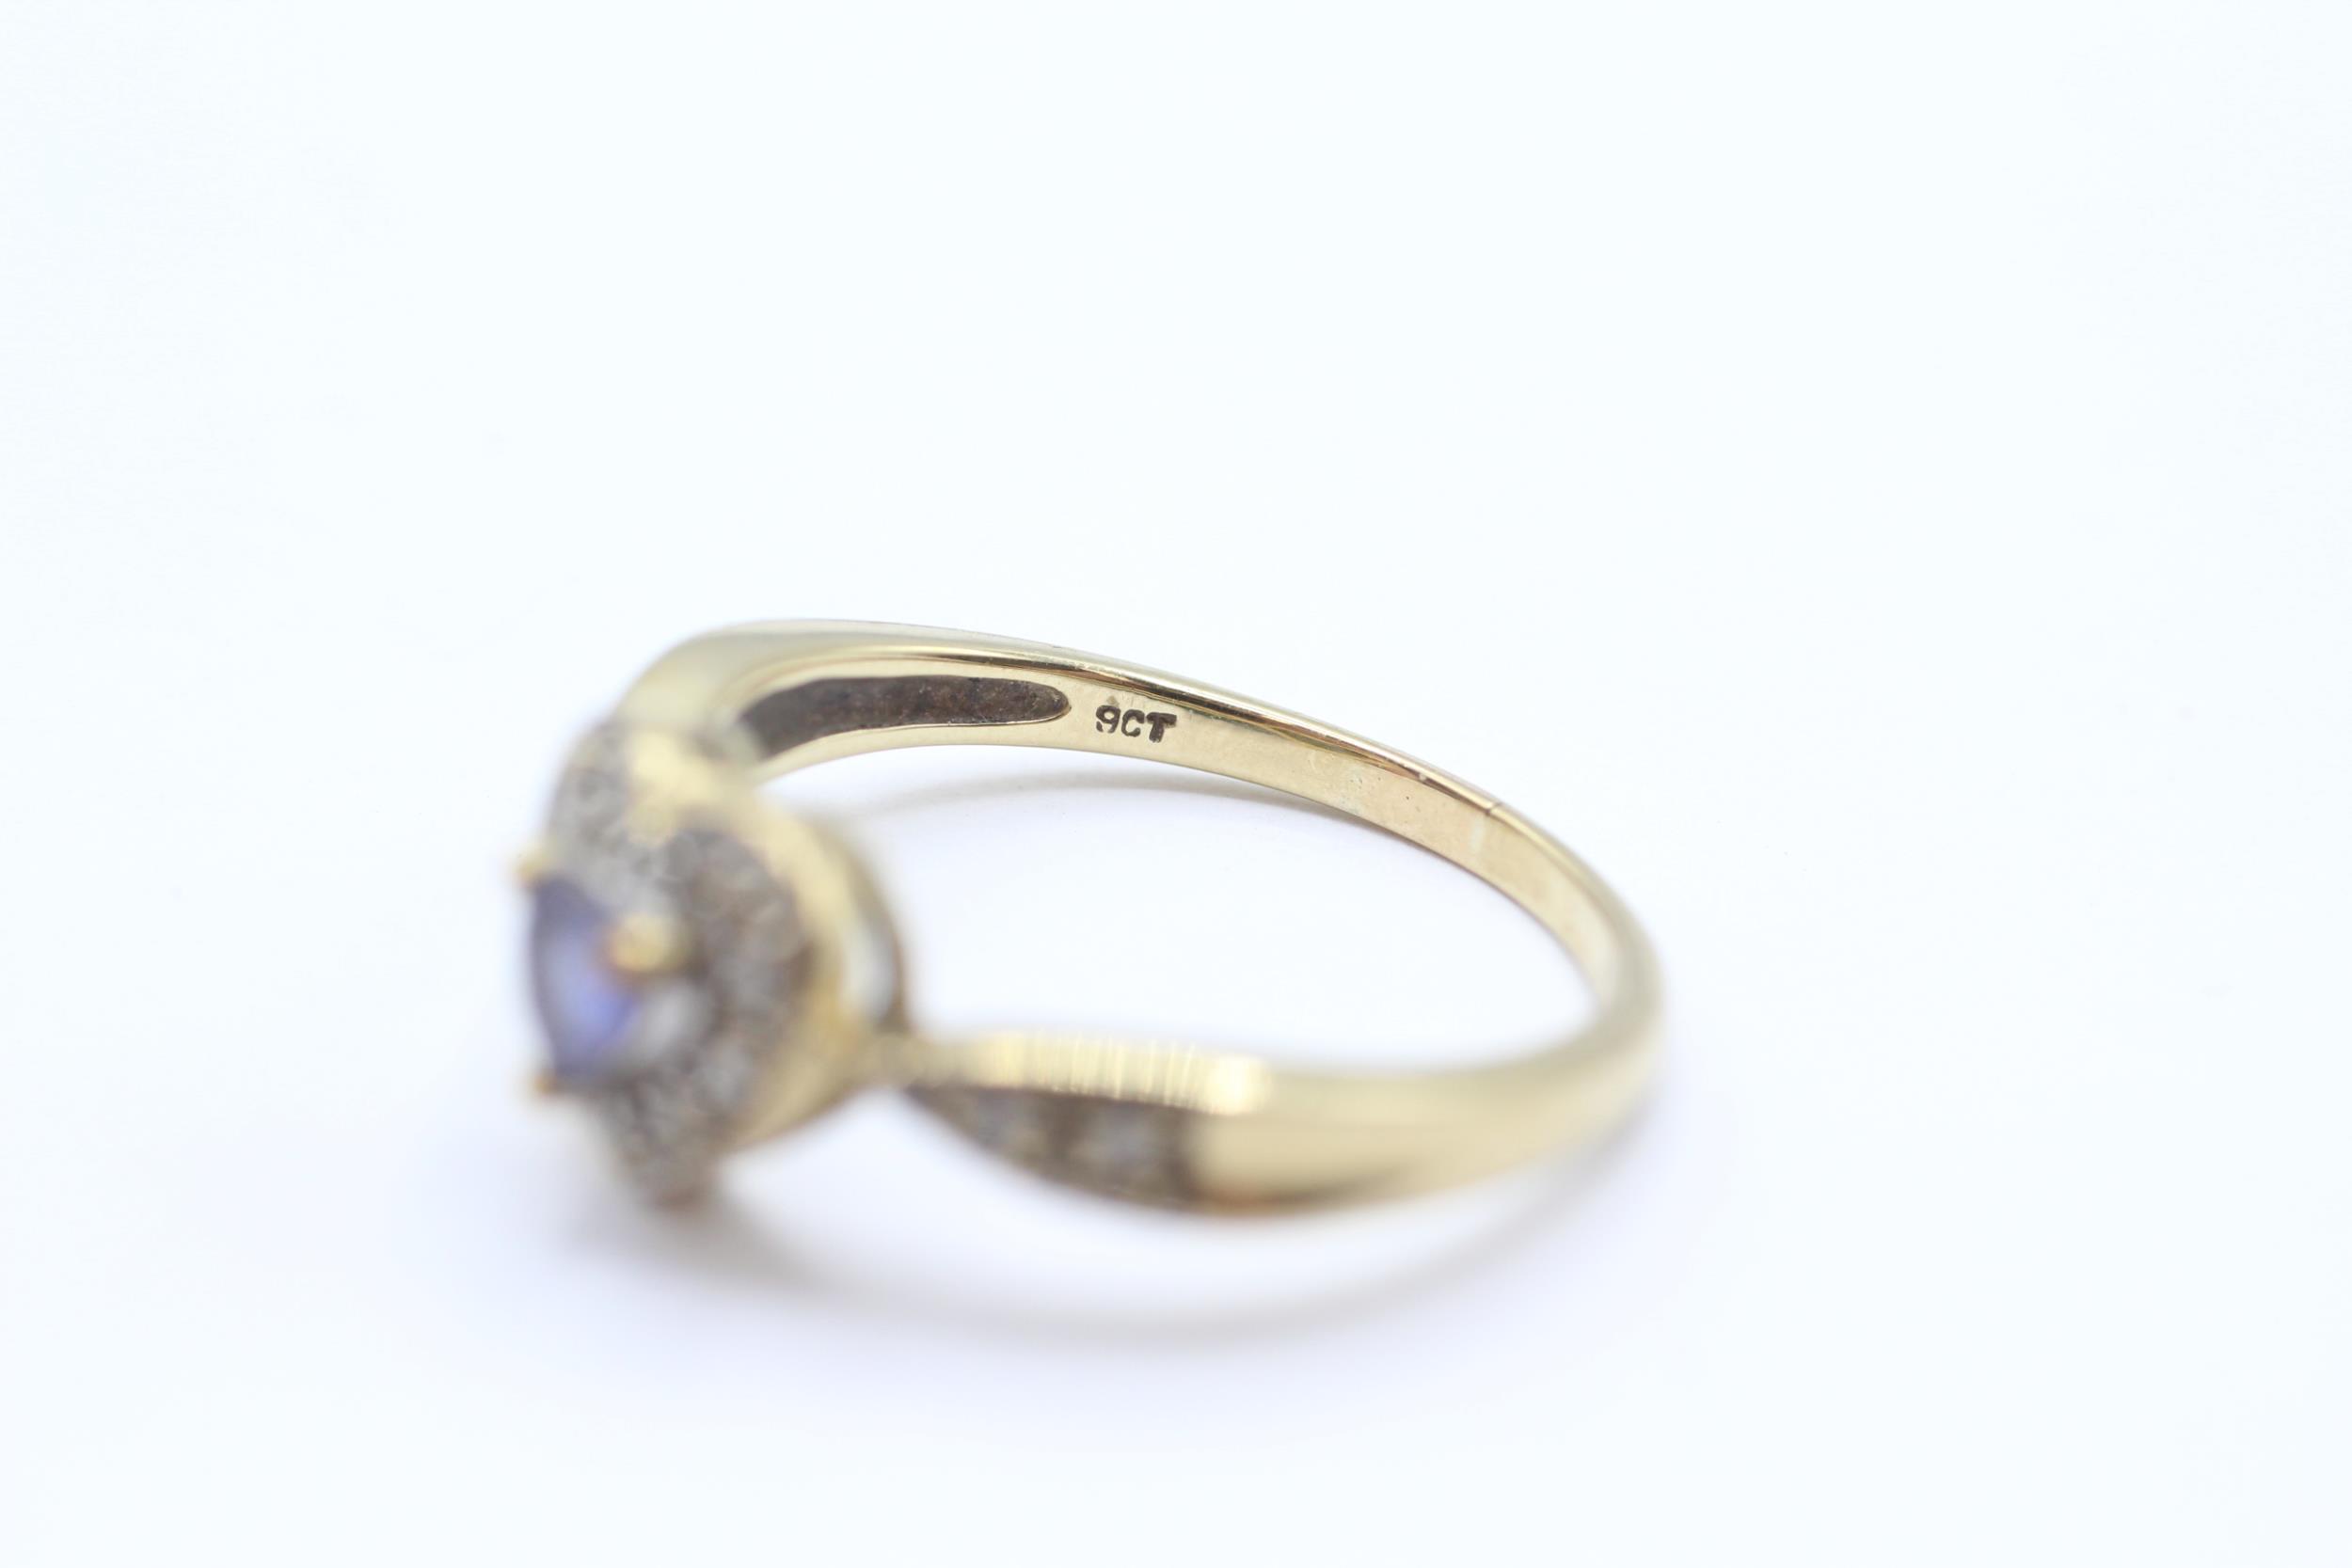 9ct gold diamond and tanzanite heart halo ring Size Q - 2.9 g - Image 4 of 4